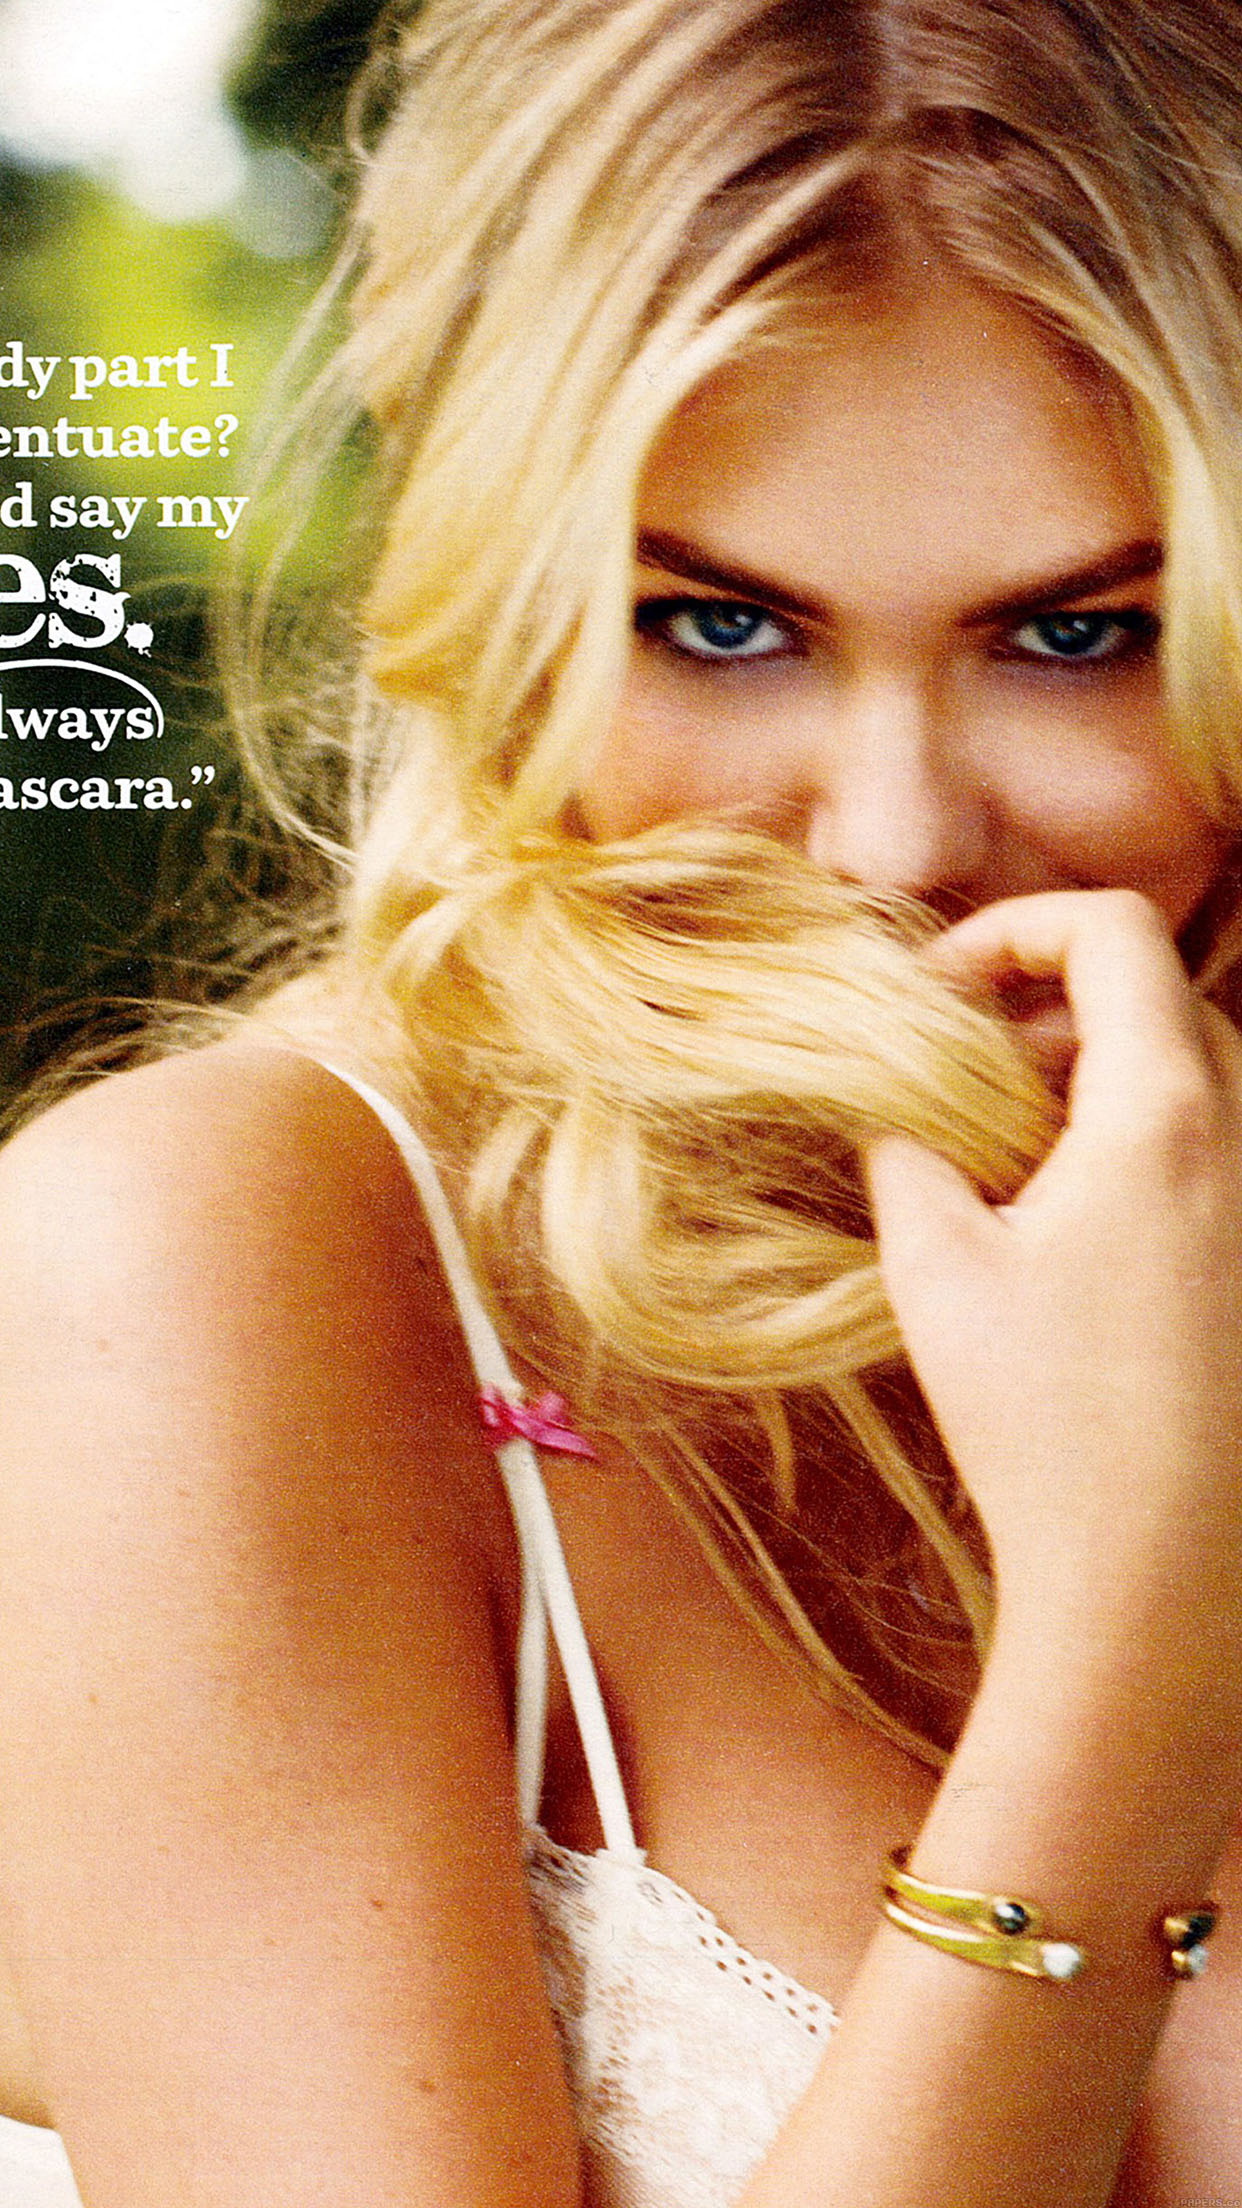 Kate Upton Magazine Shy Face Girl Art Android wallpaper